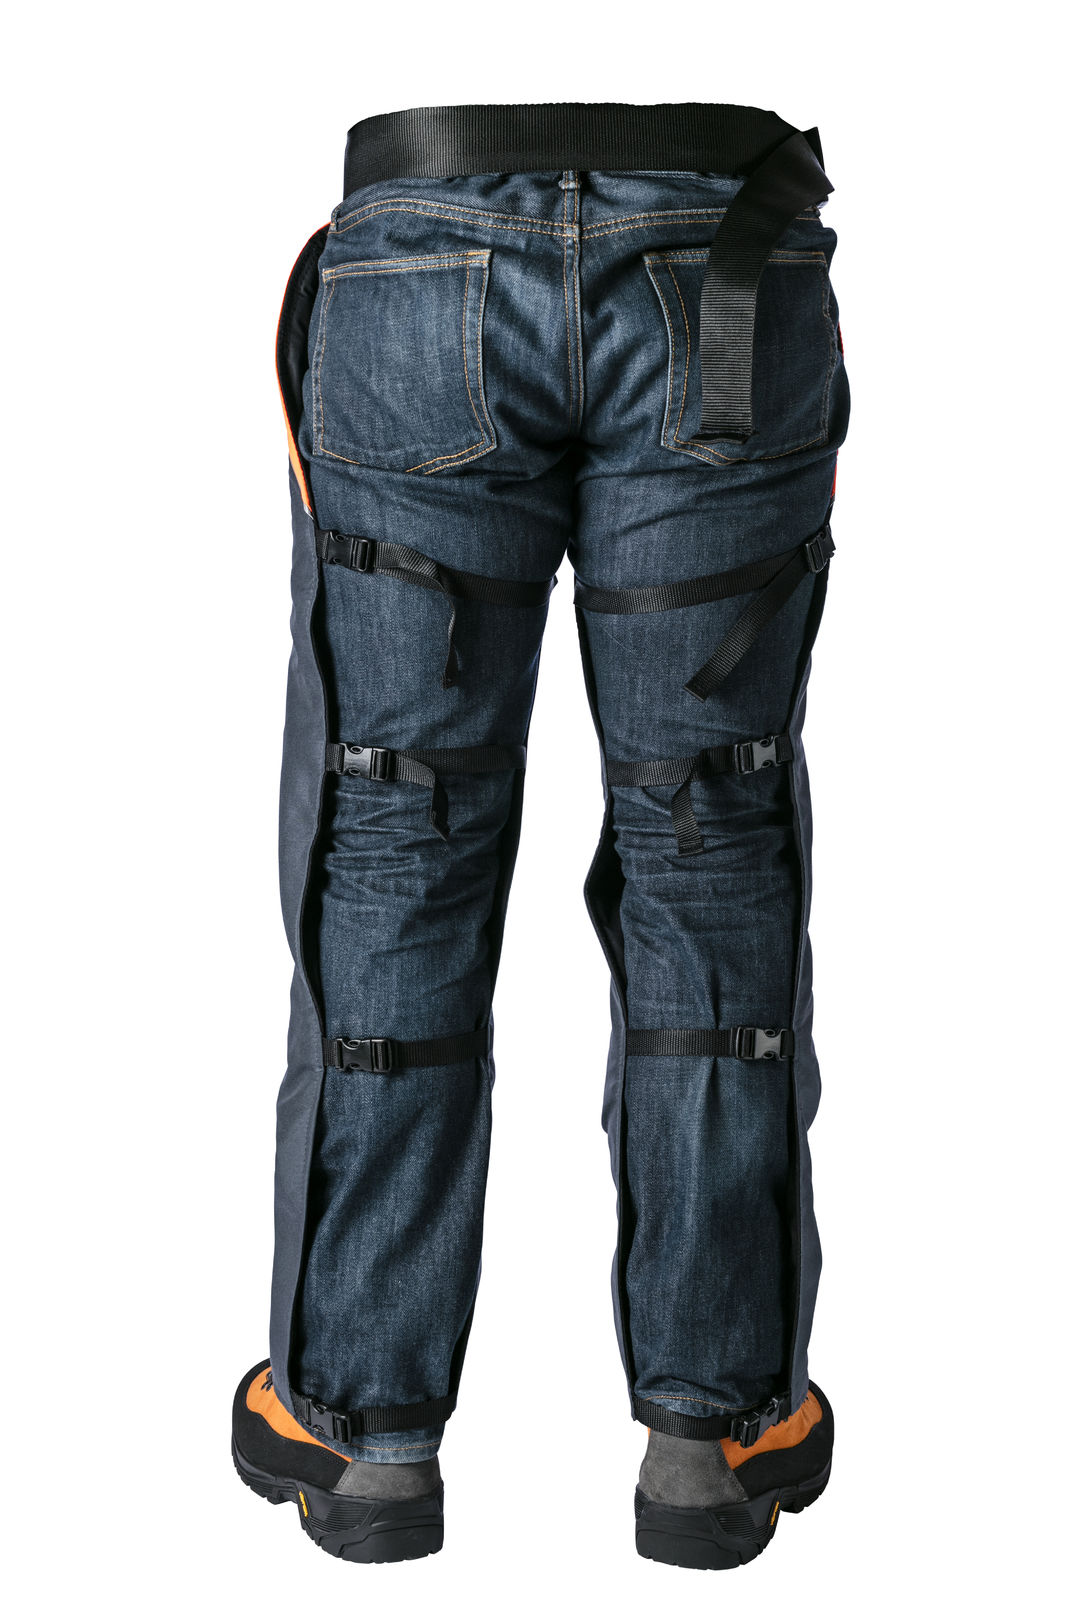 Clogger Zero Light and Cool Chainsaw Protective Chaps - RDO Equipment